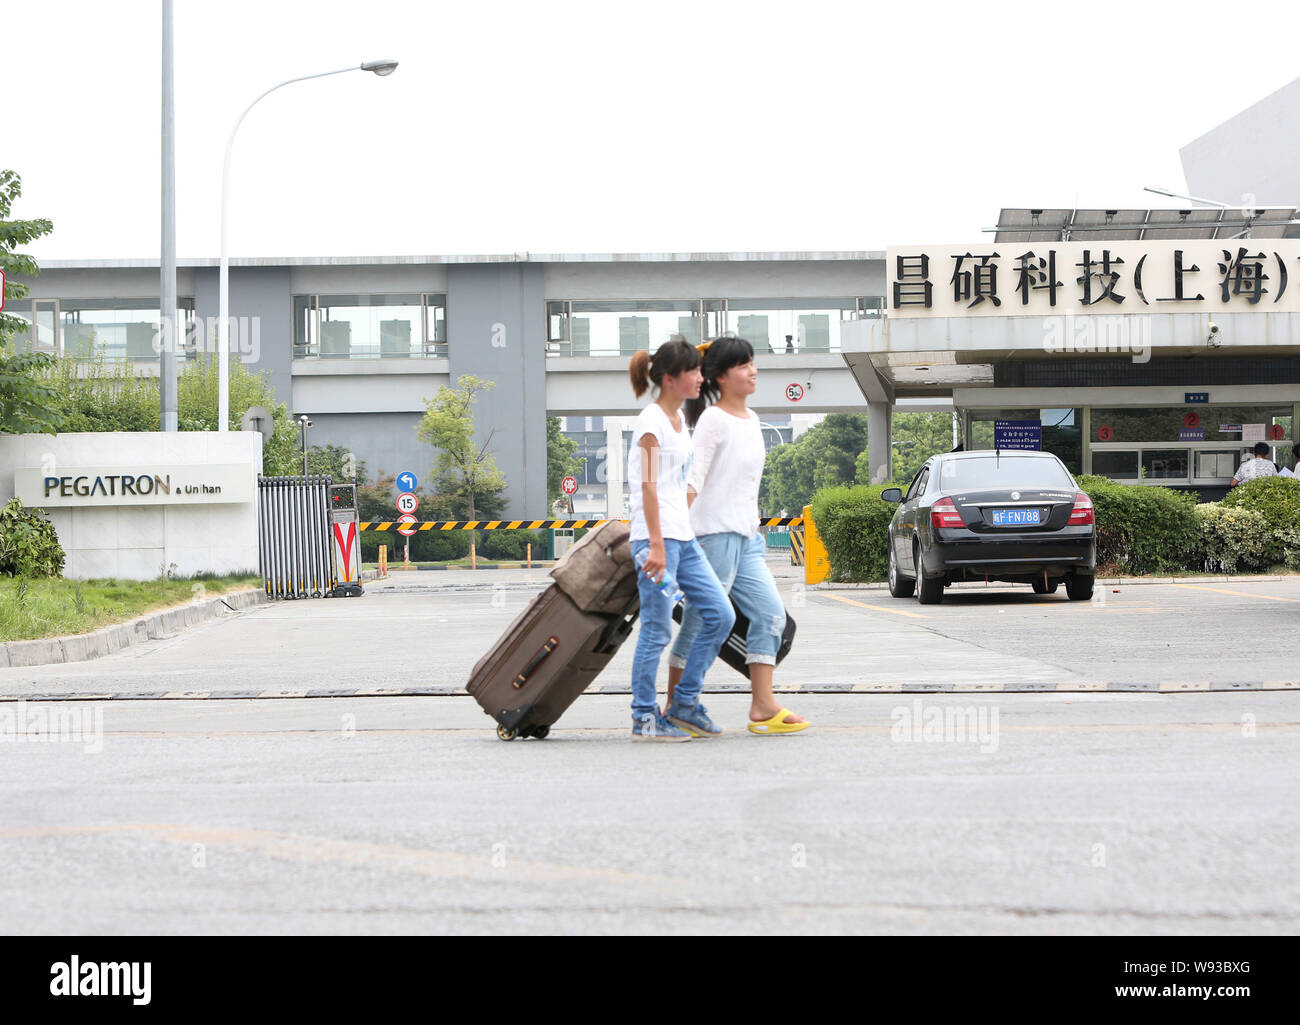 Chinese migrant workers walk past the plant of Pegatron-Unihan in Pudong, Shanghai, China, 25 July 2013.   A new report from a Chinese workers-rights Stock Photo